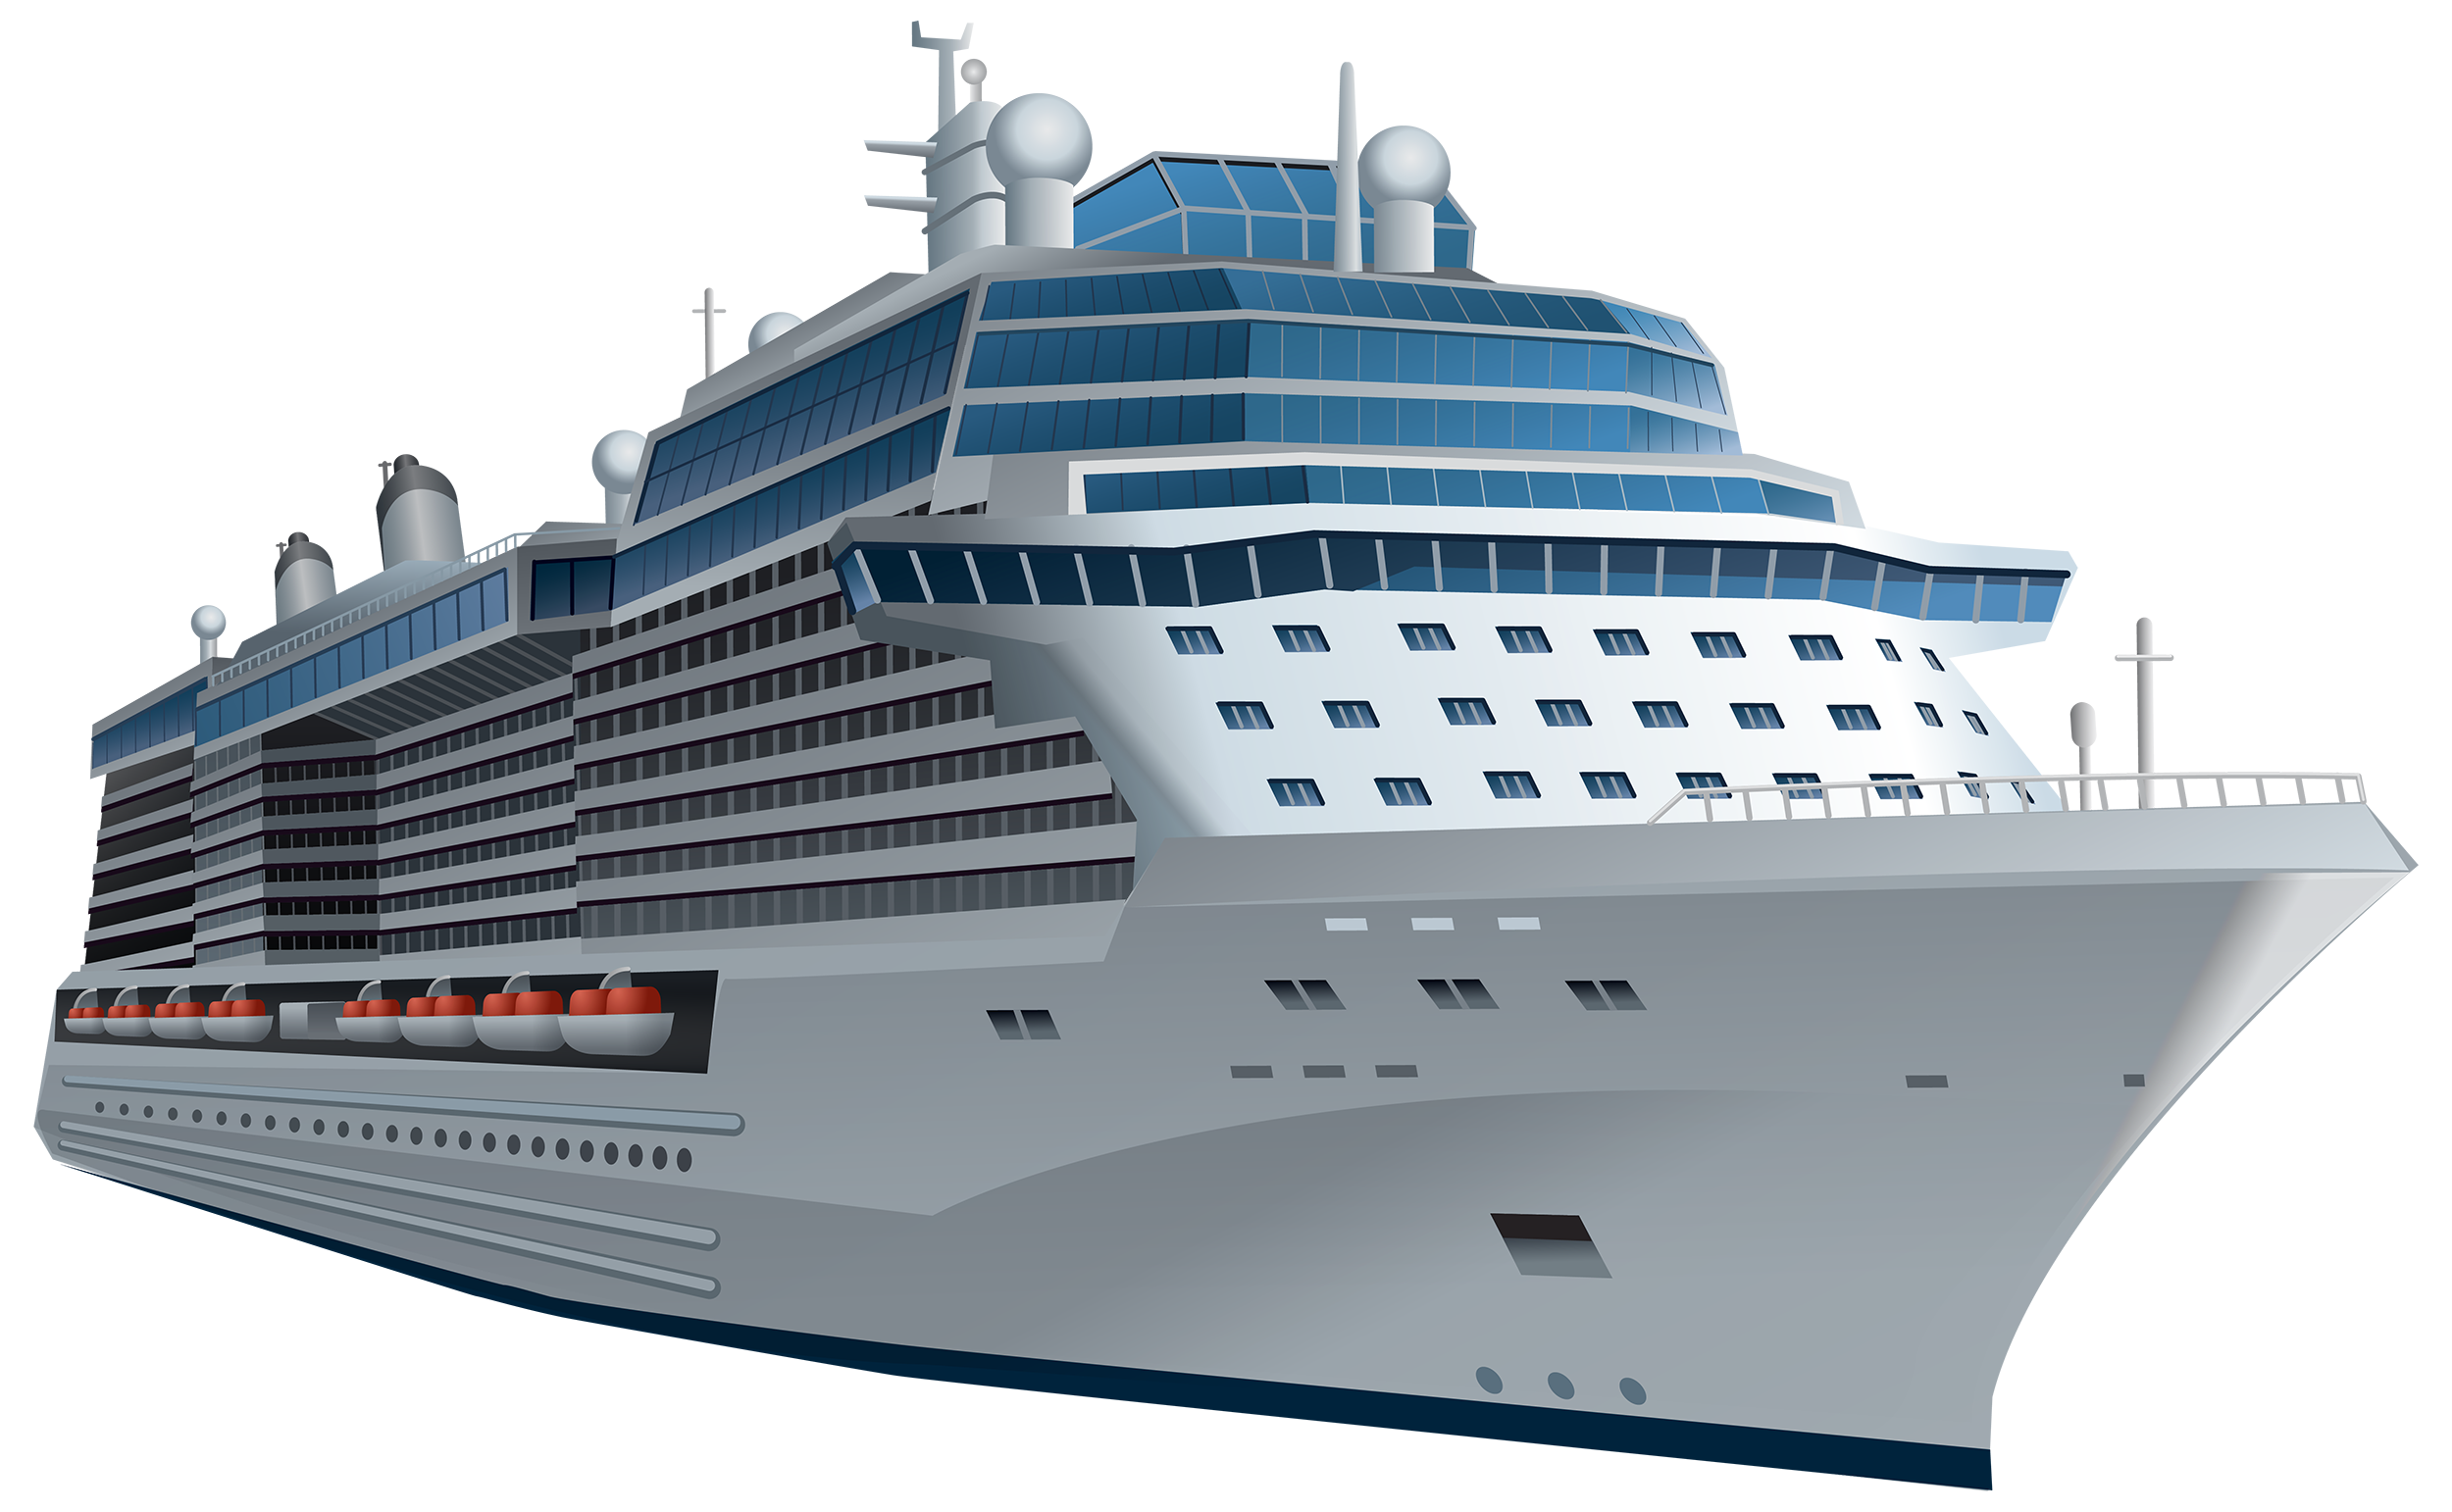 Cruise passenger ship clipart - Clipground